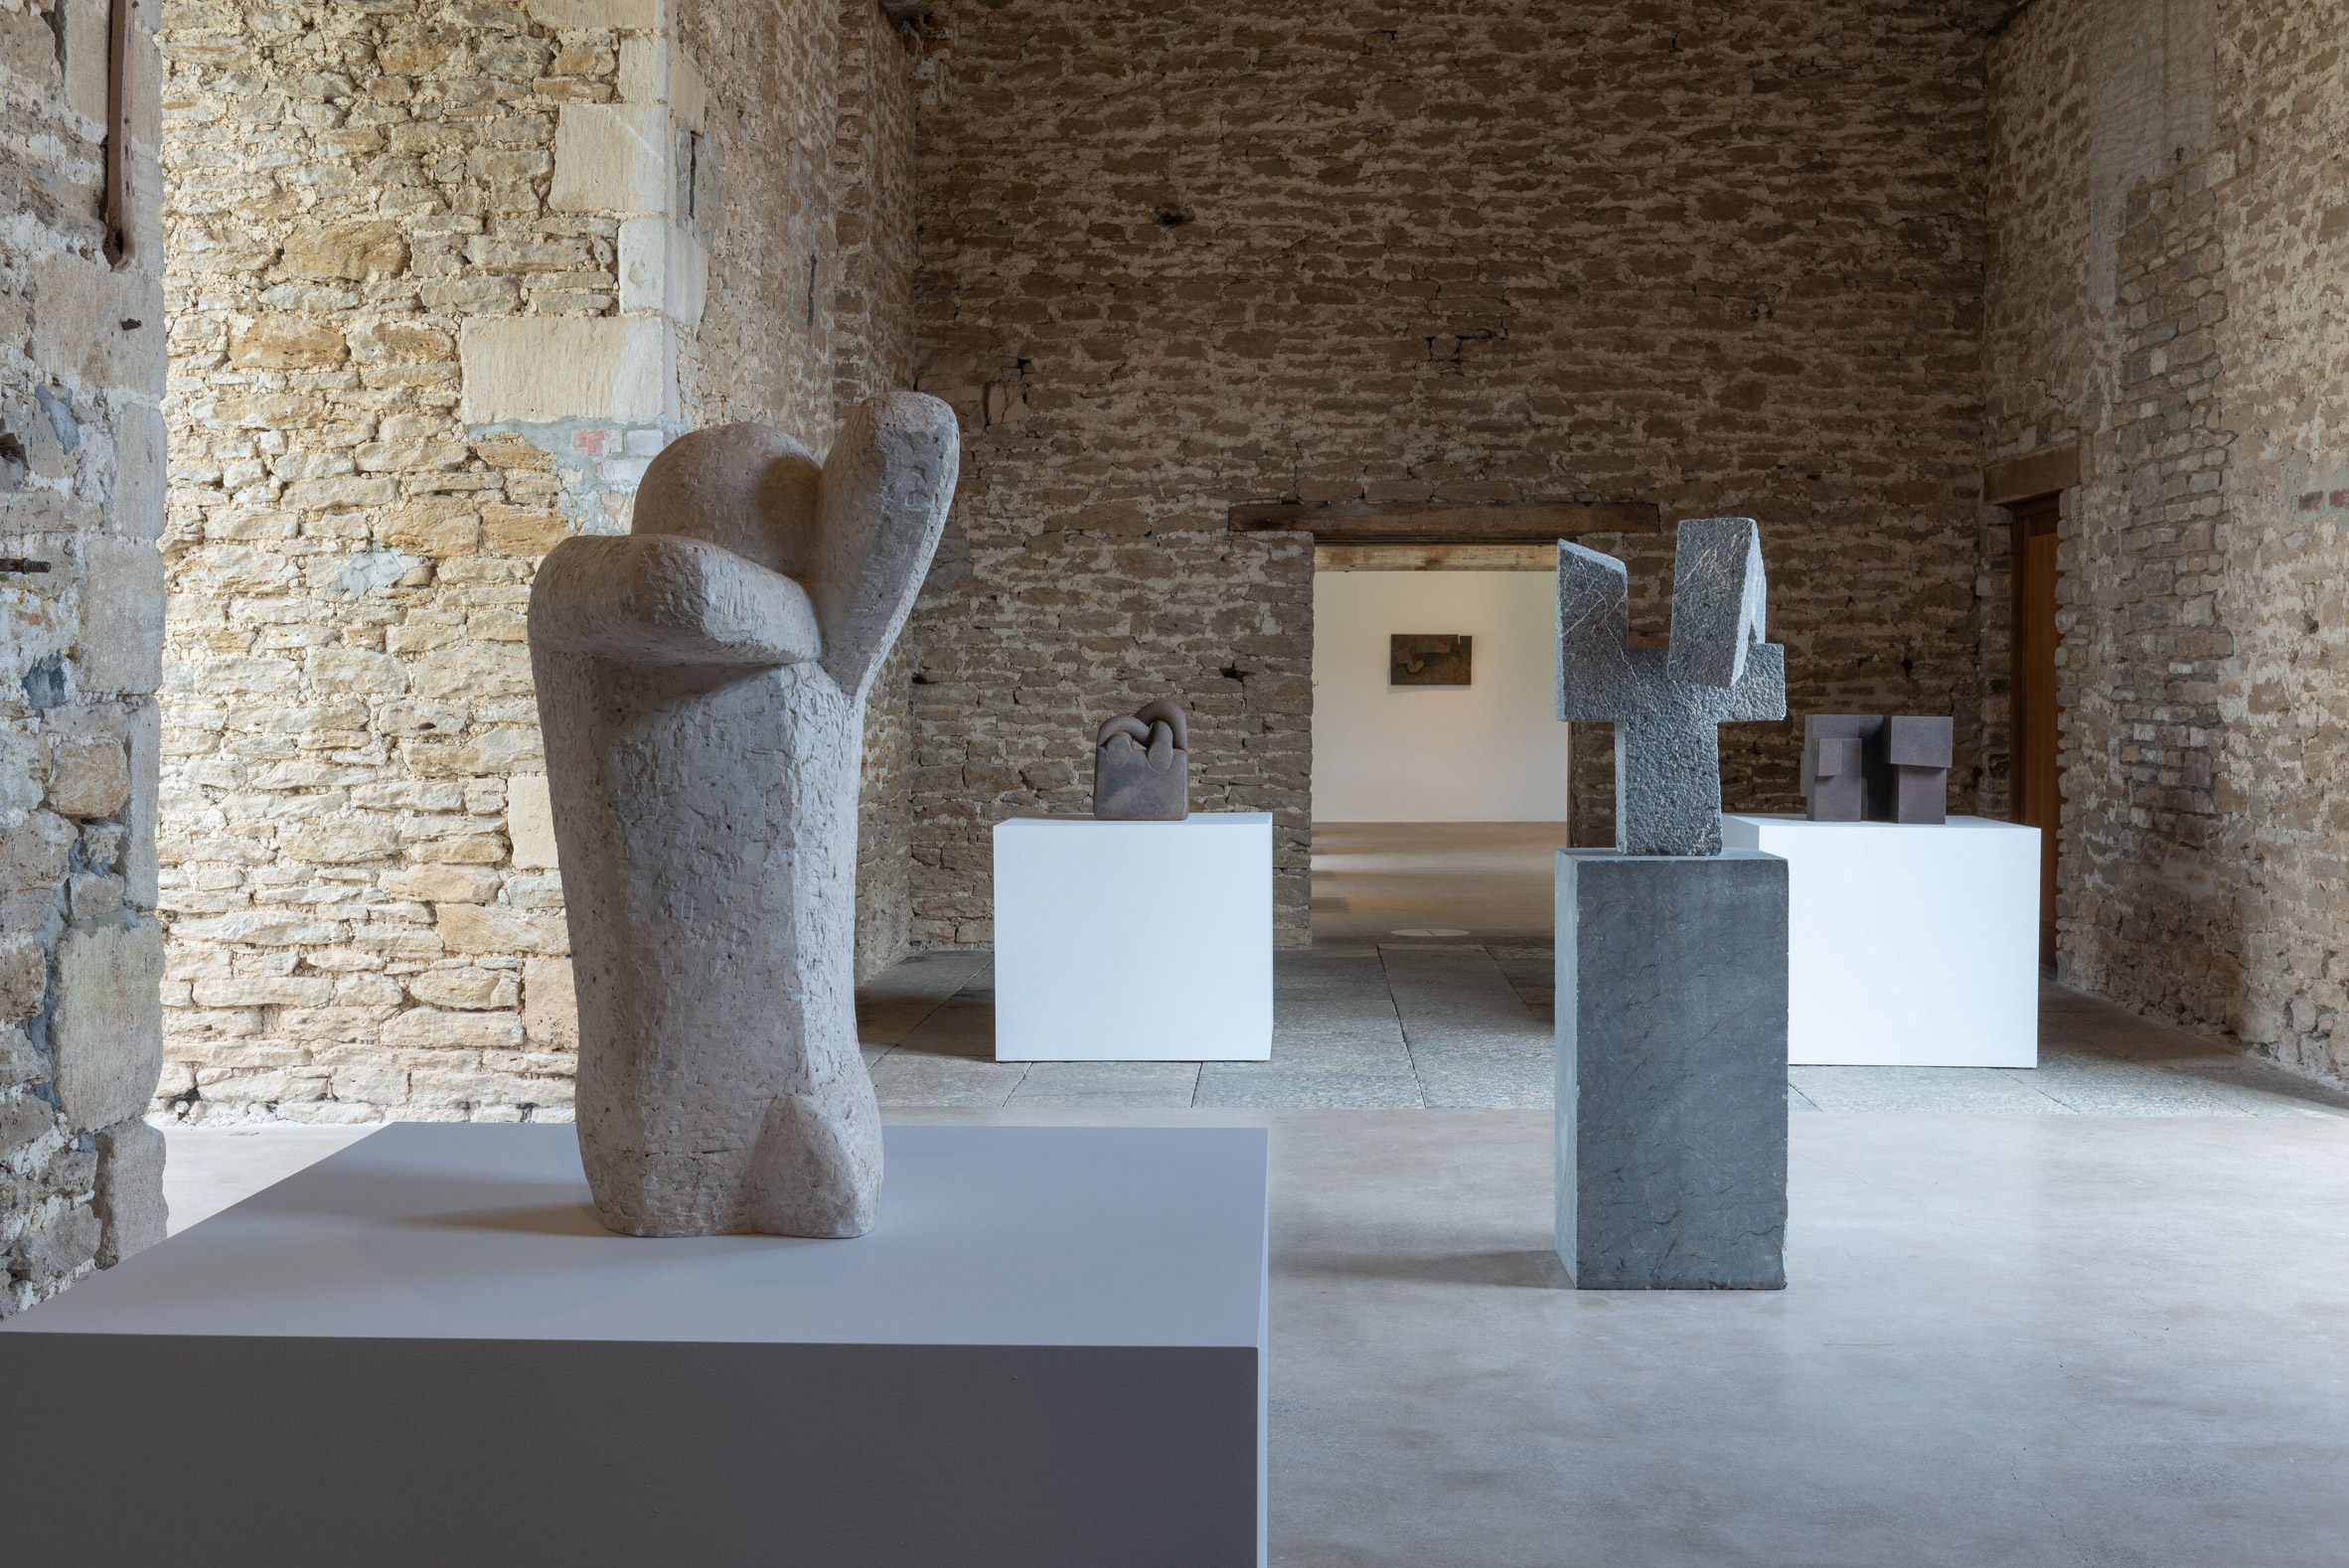 Stone sculptures created by Chillida